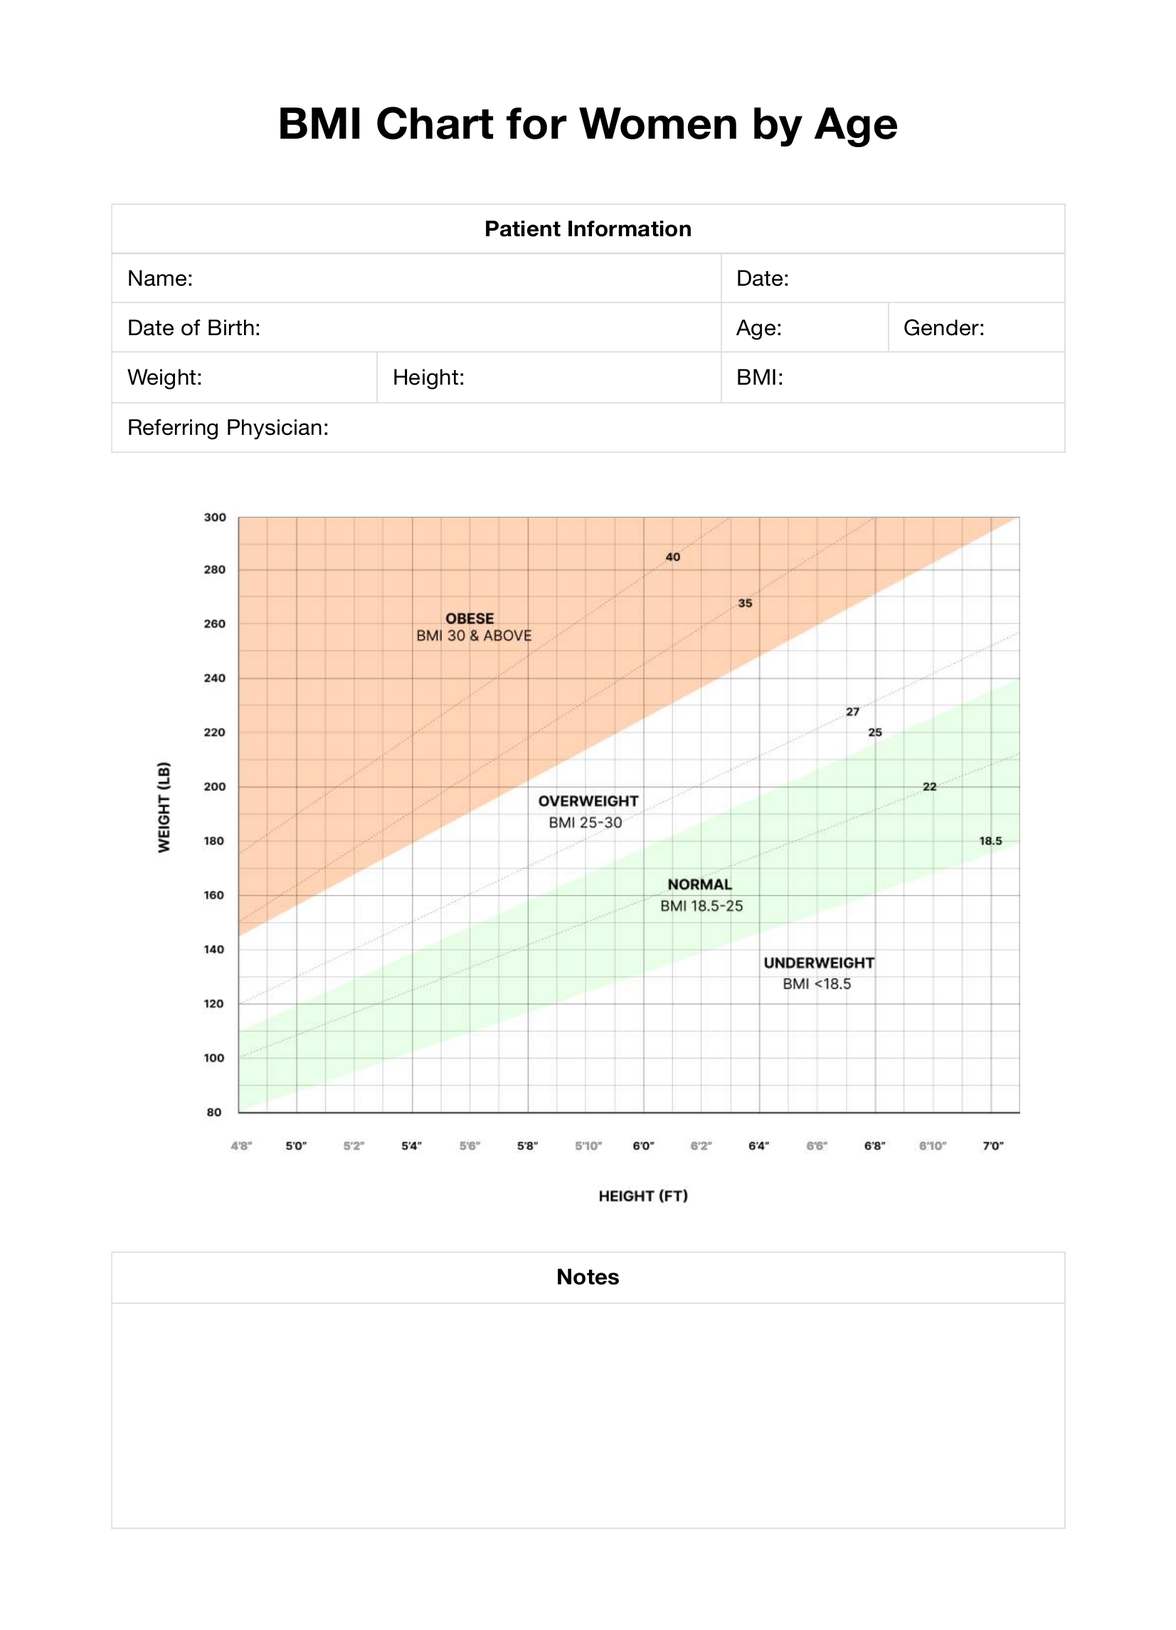 BMI Chart for Women by Age PDF Example